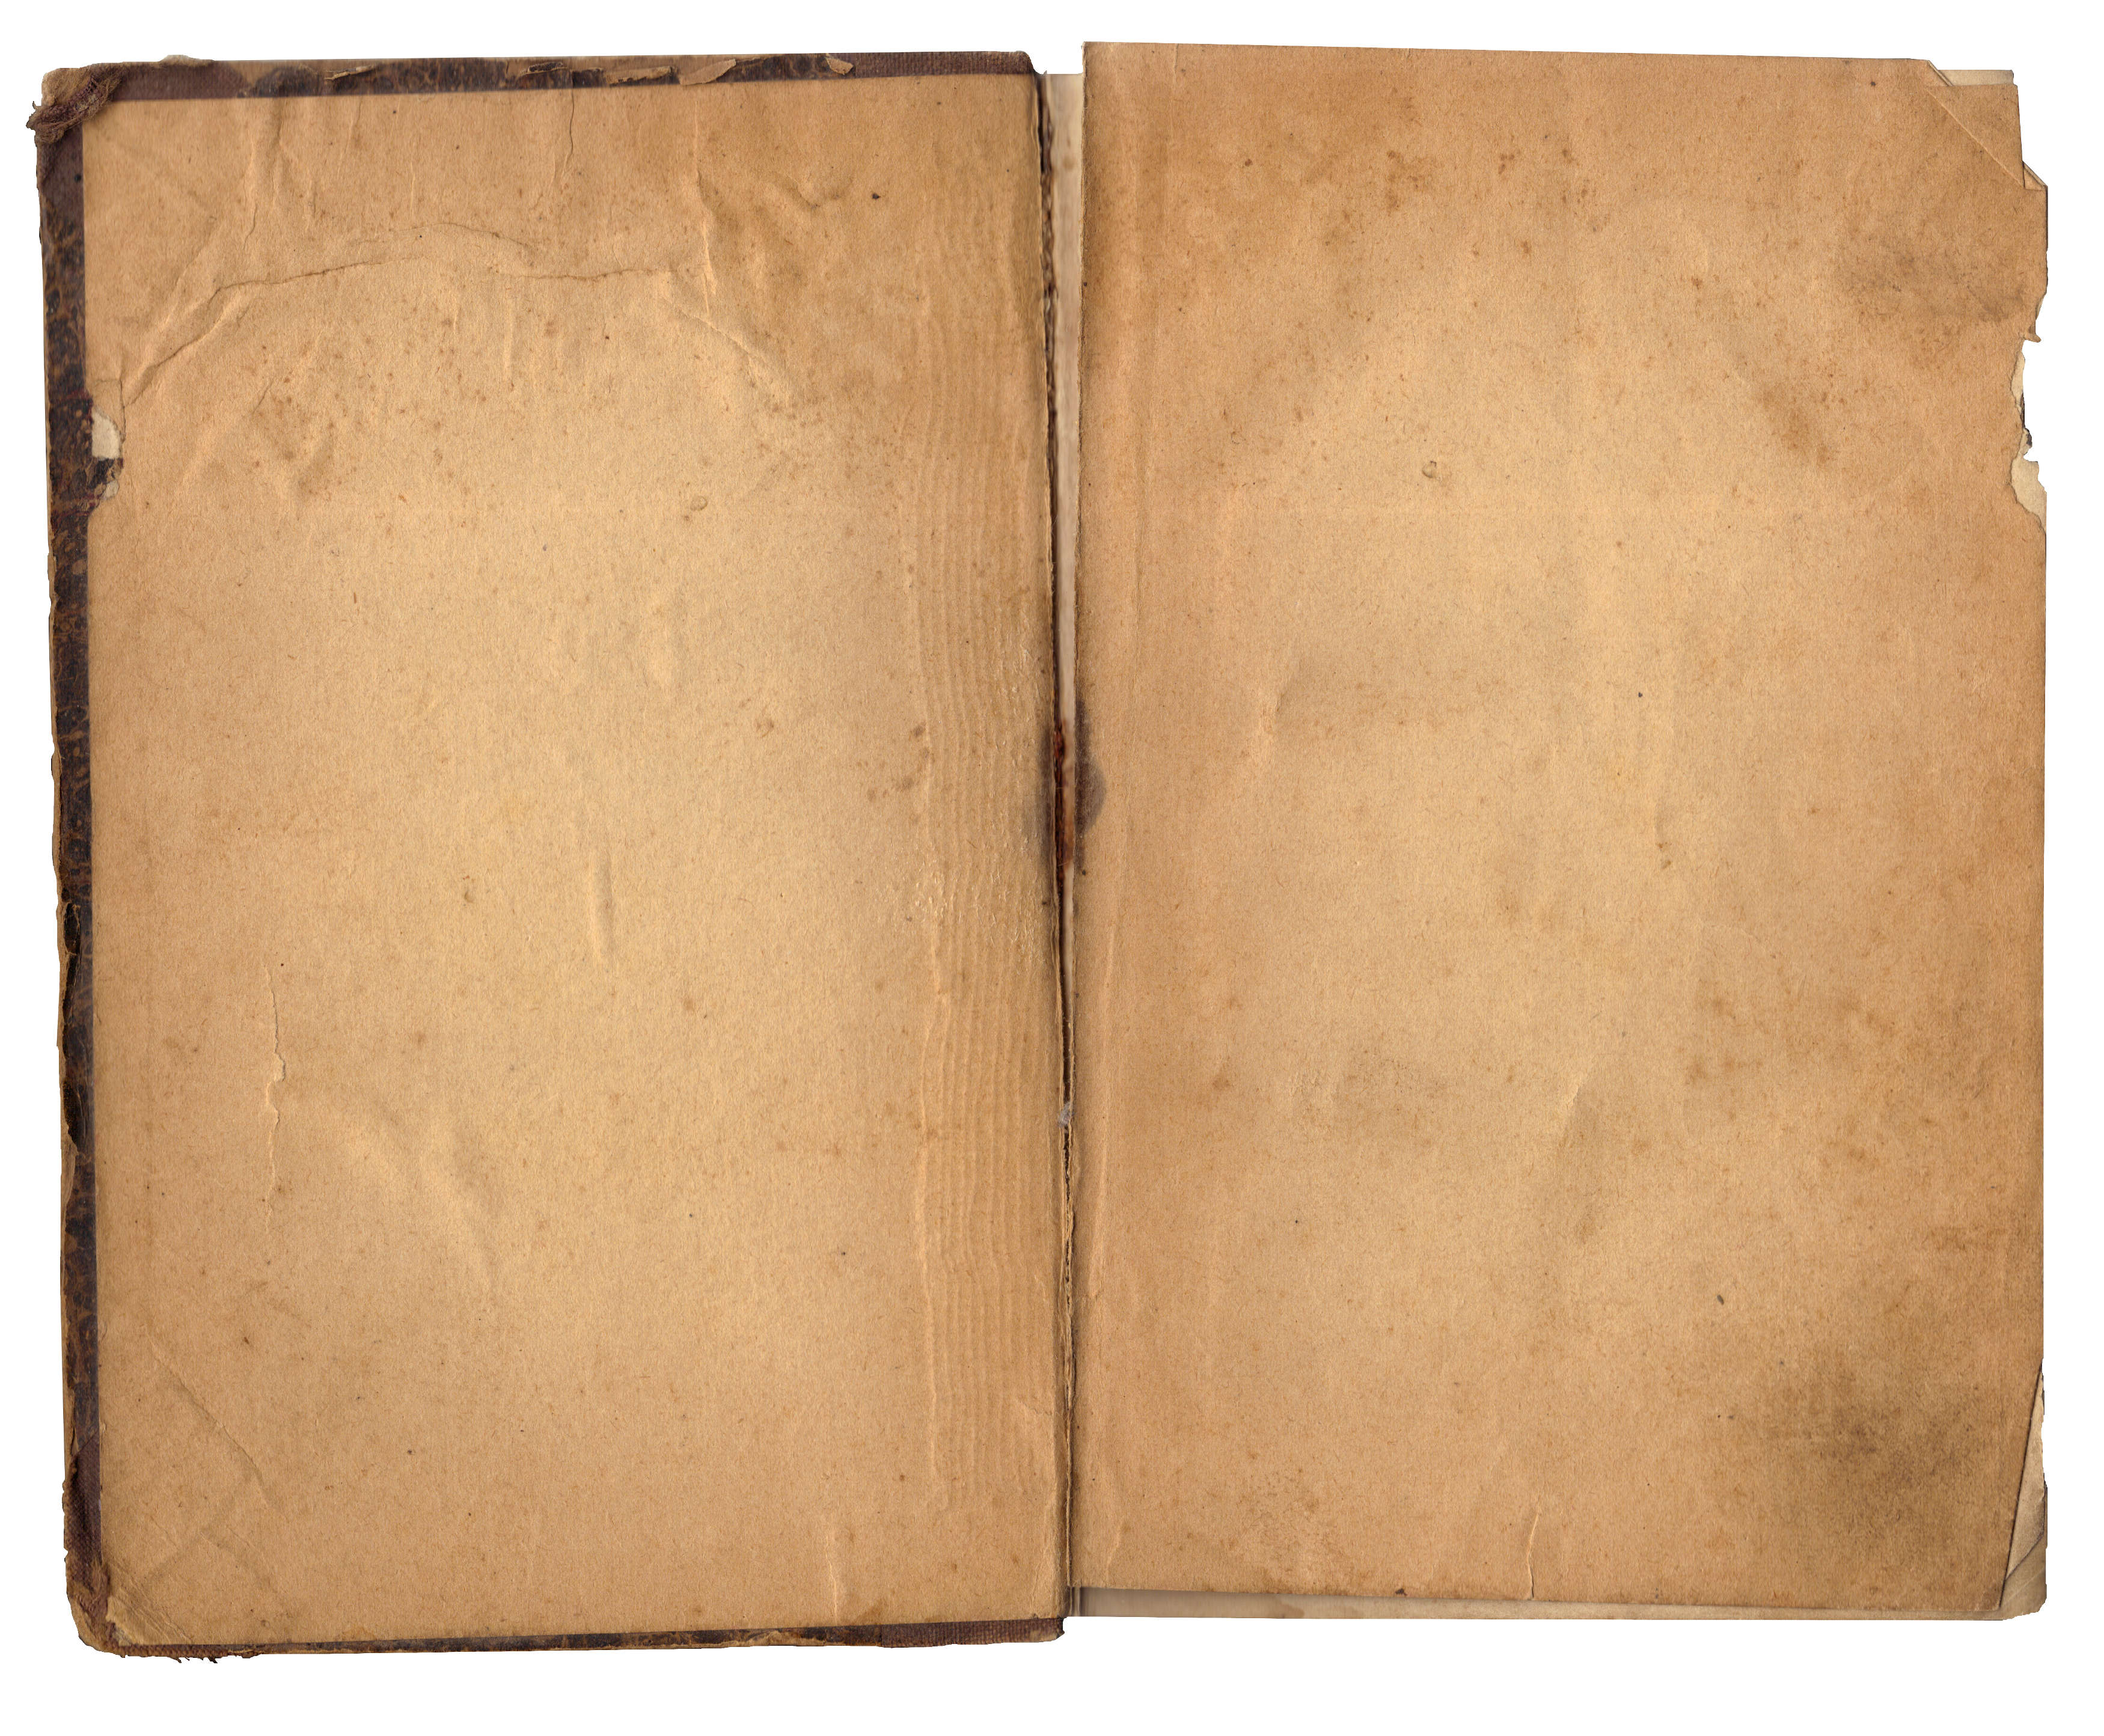 5 Old Book Empty Pages Textures (JPG) Vol. 2.